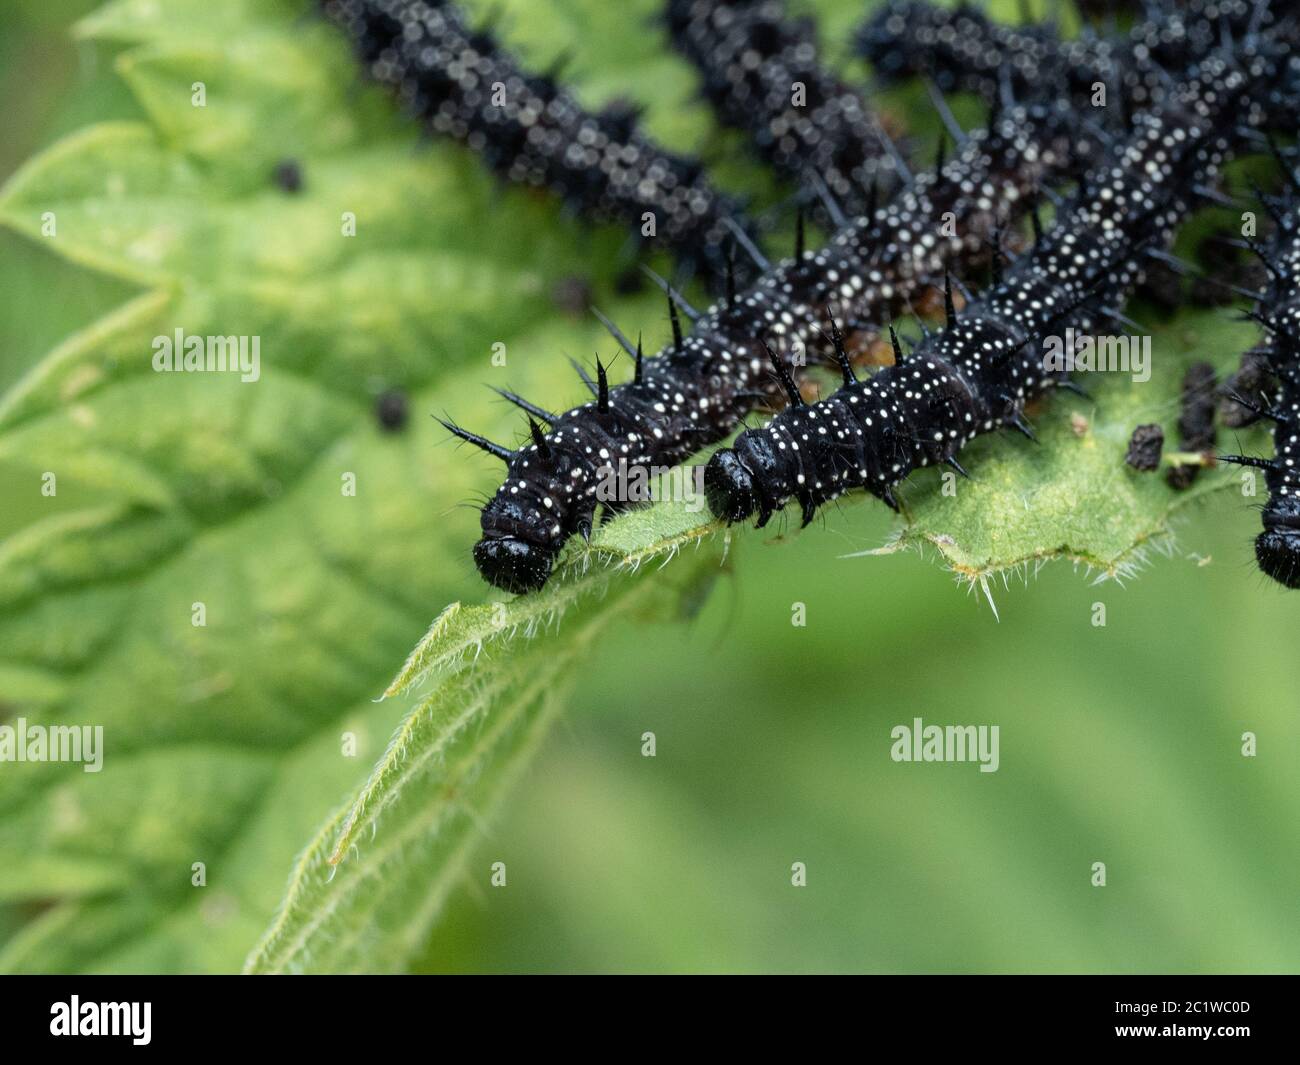 A close up of a group of young peacock butterfly caterpillars feeding on stinging nettle leaves Stock Photo